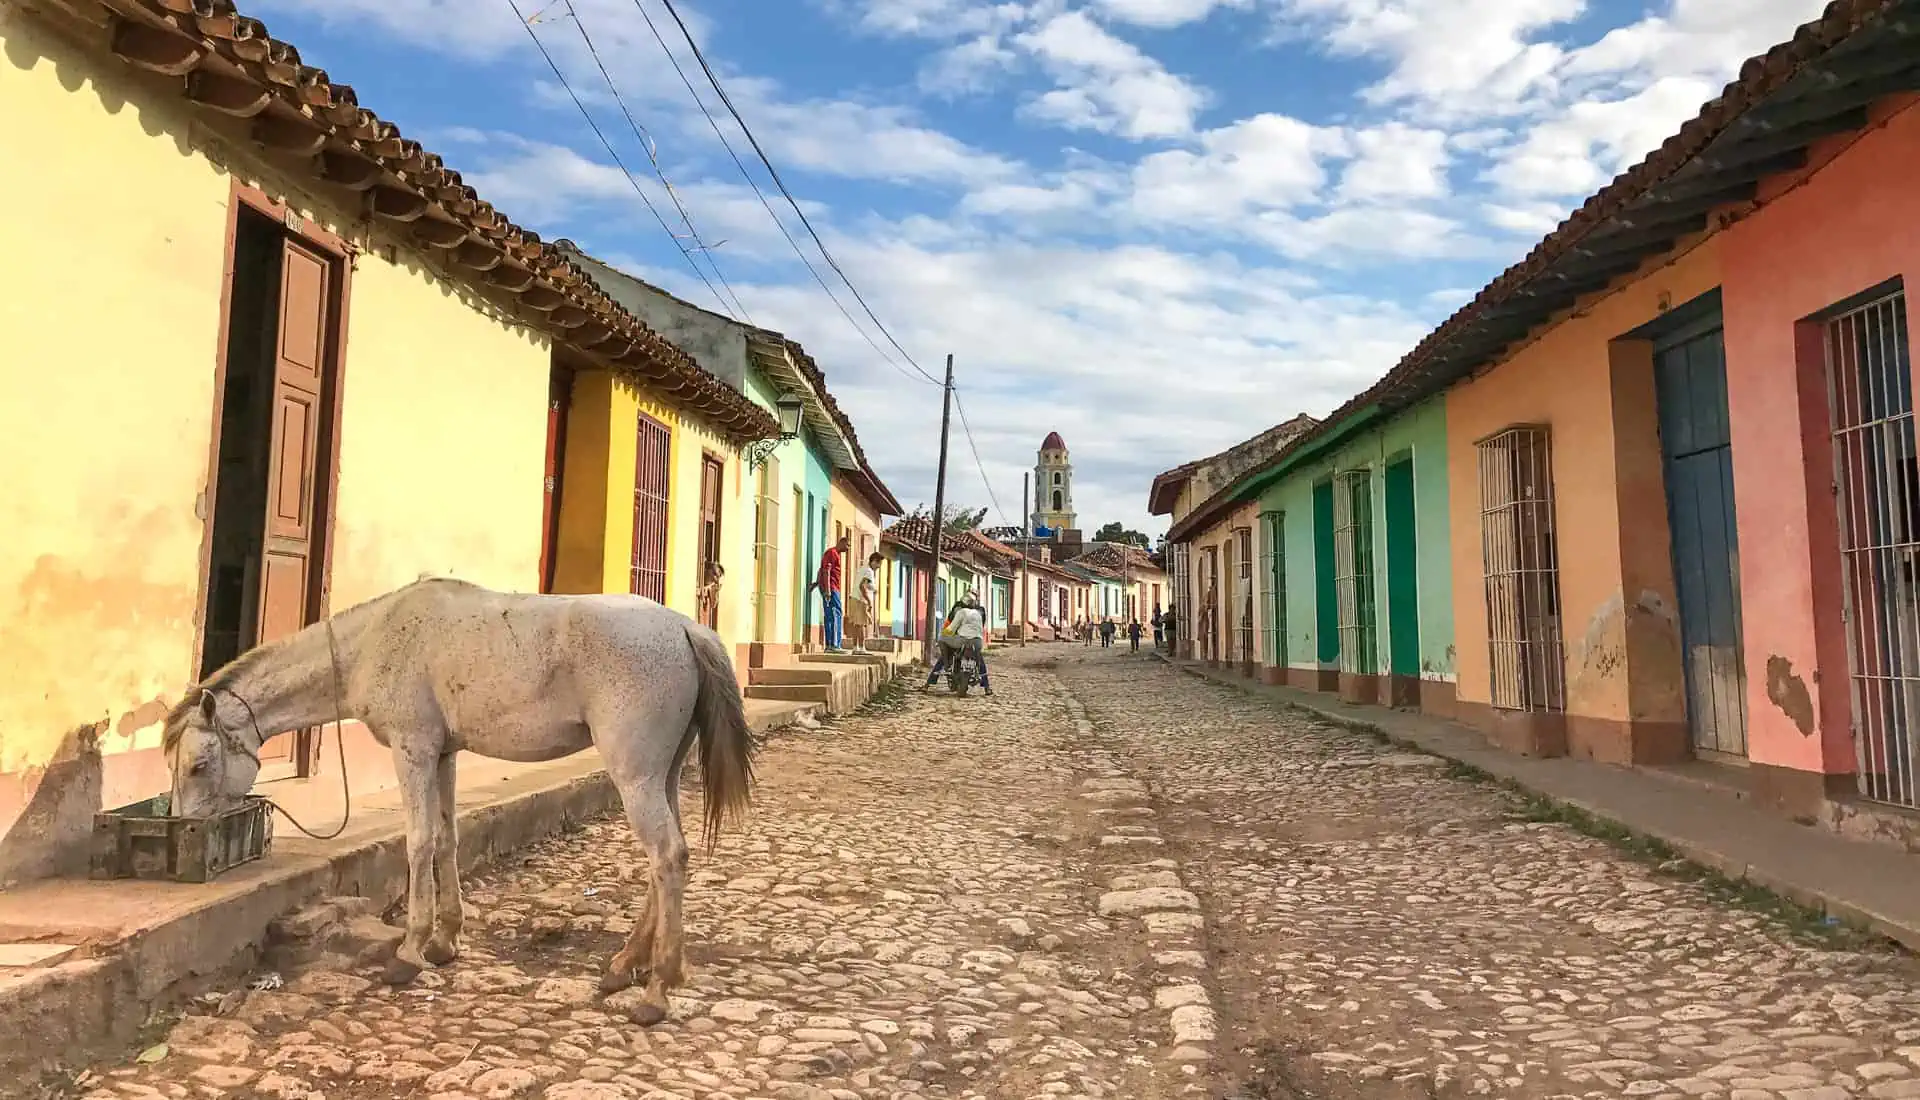 Horse feeds at trough on street with bright houses during Cuba visit.